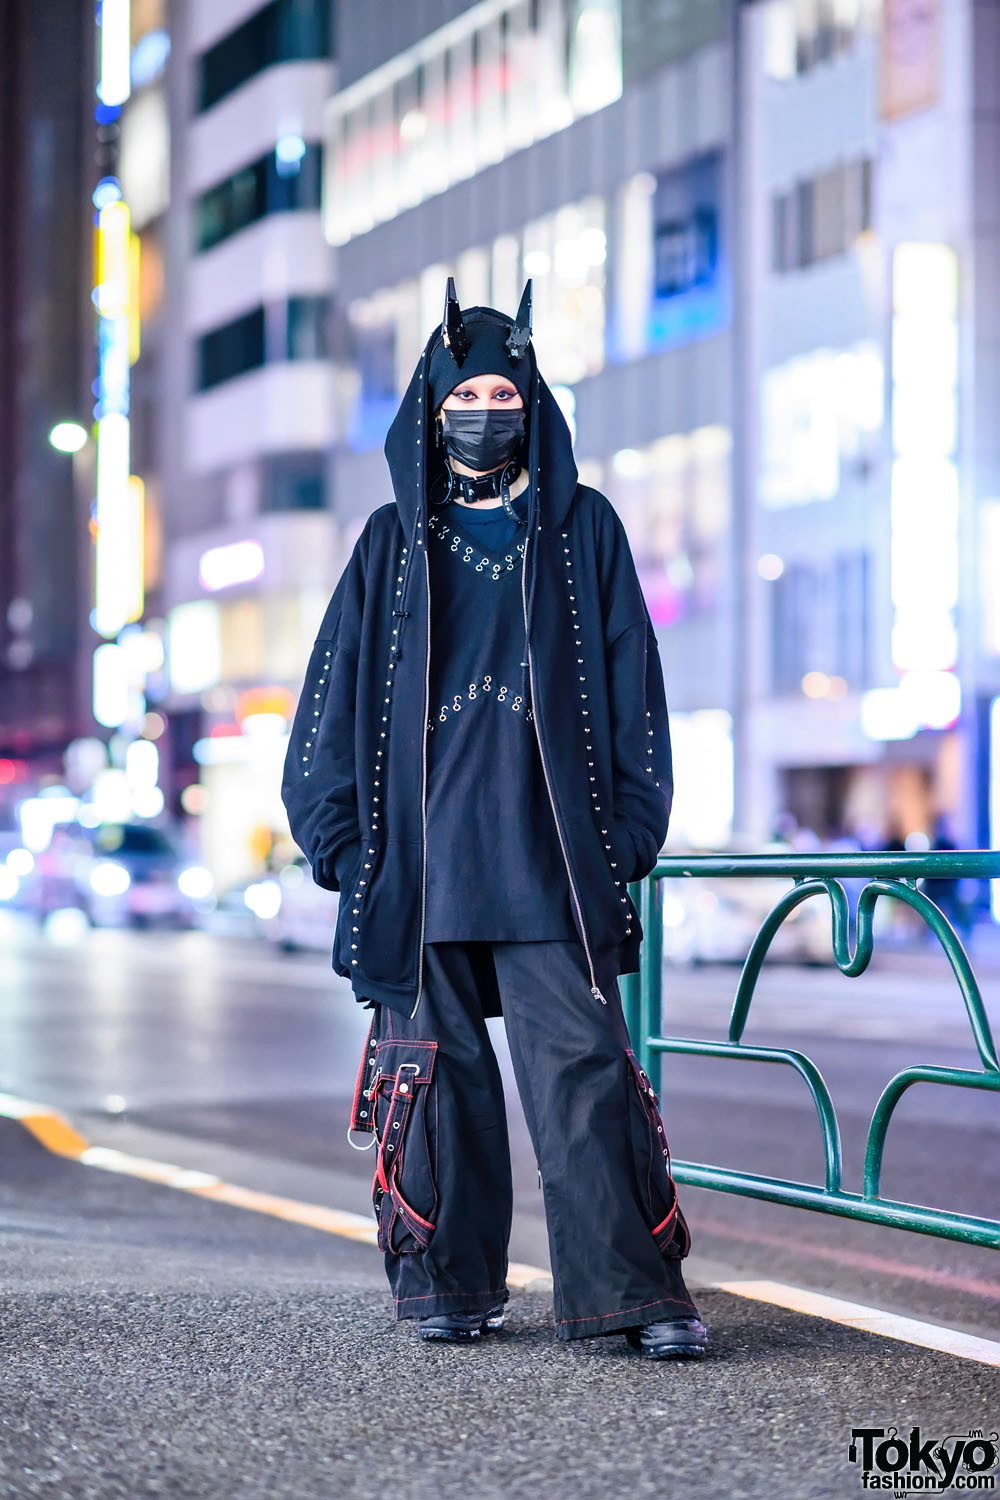 Tokyo Fashion – Street snaps and fashion news from Tokyo, Japan